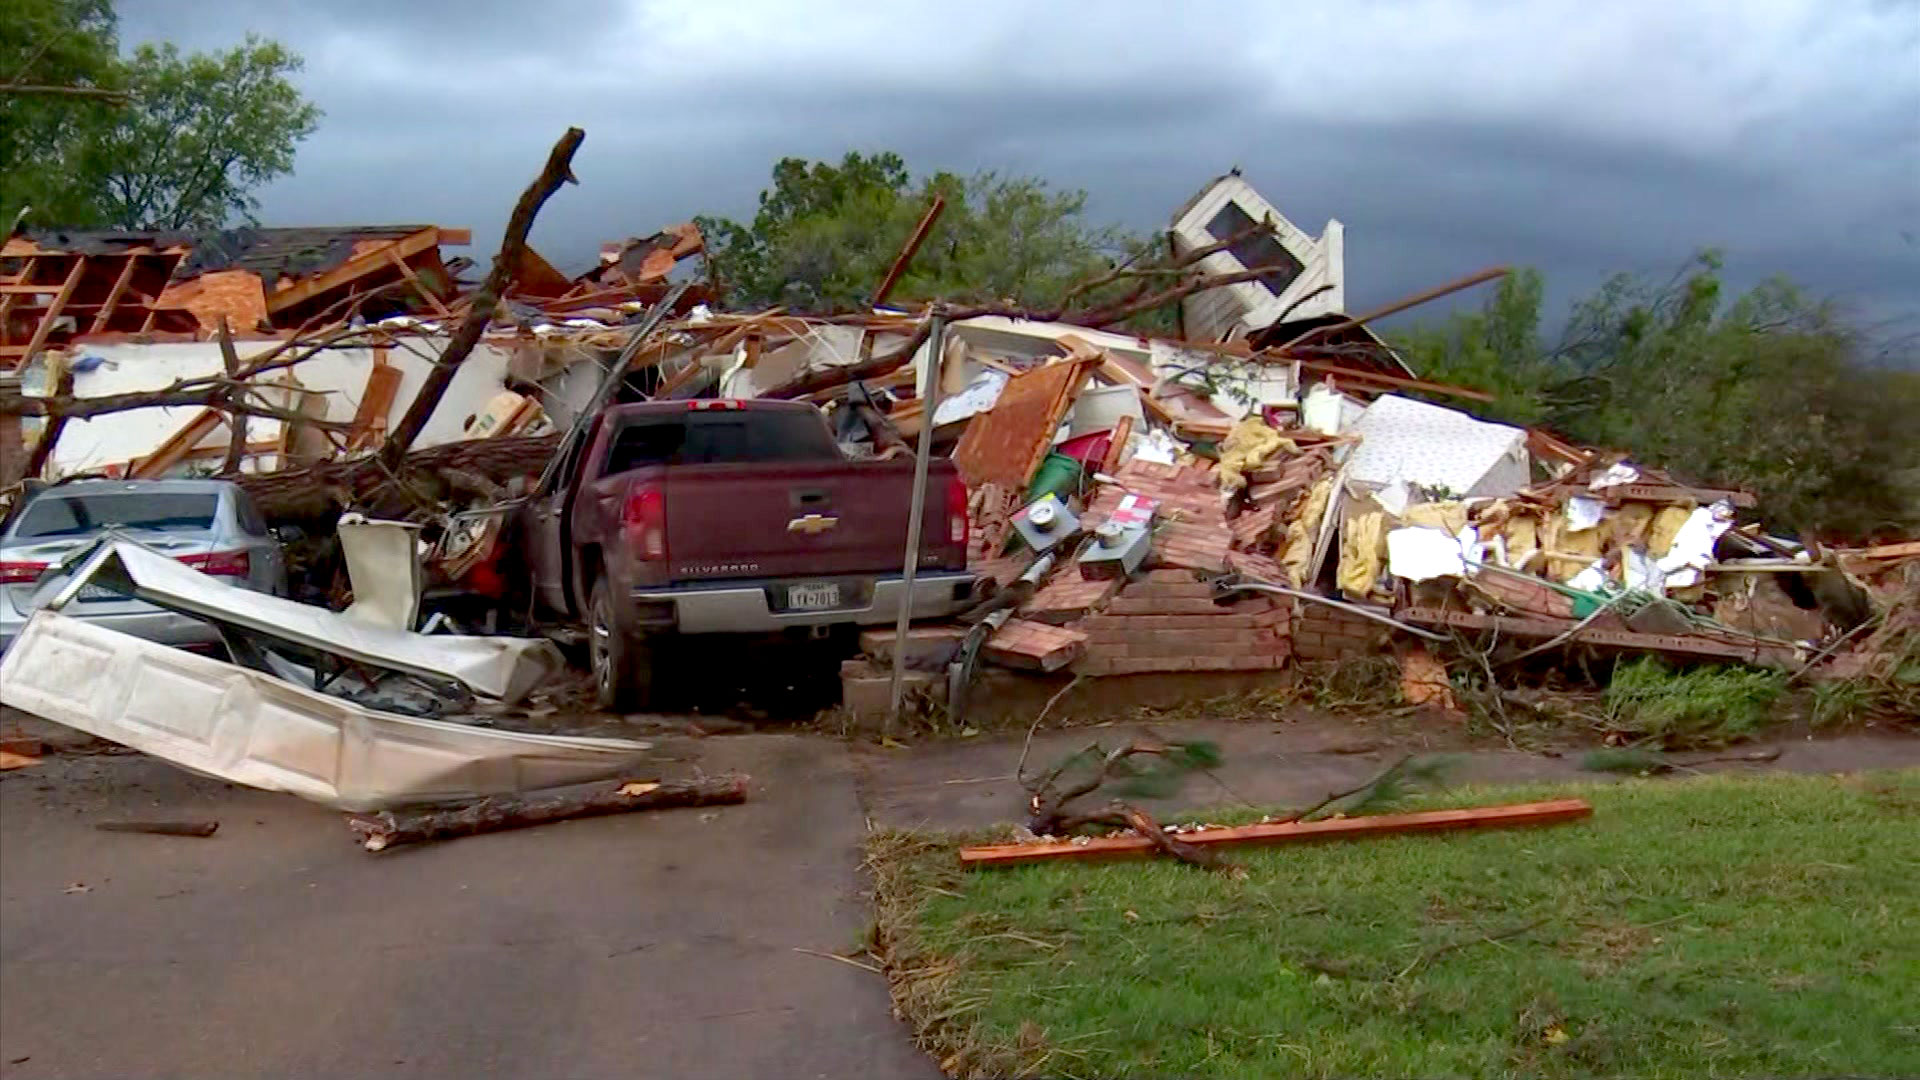 Severe Storms Bring Tornadoes With Homes Damaged image